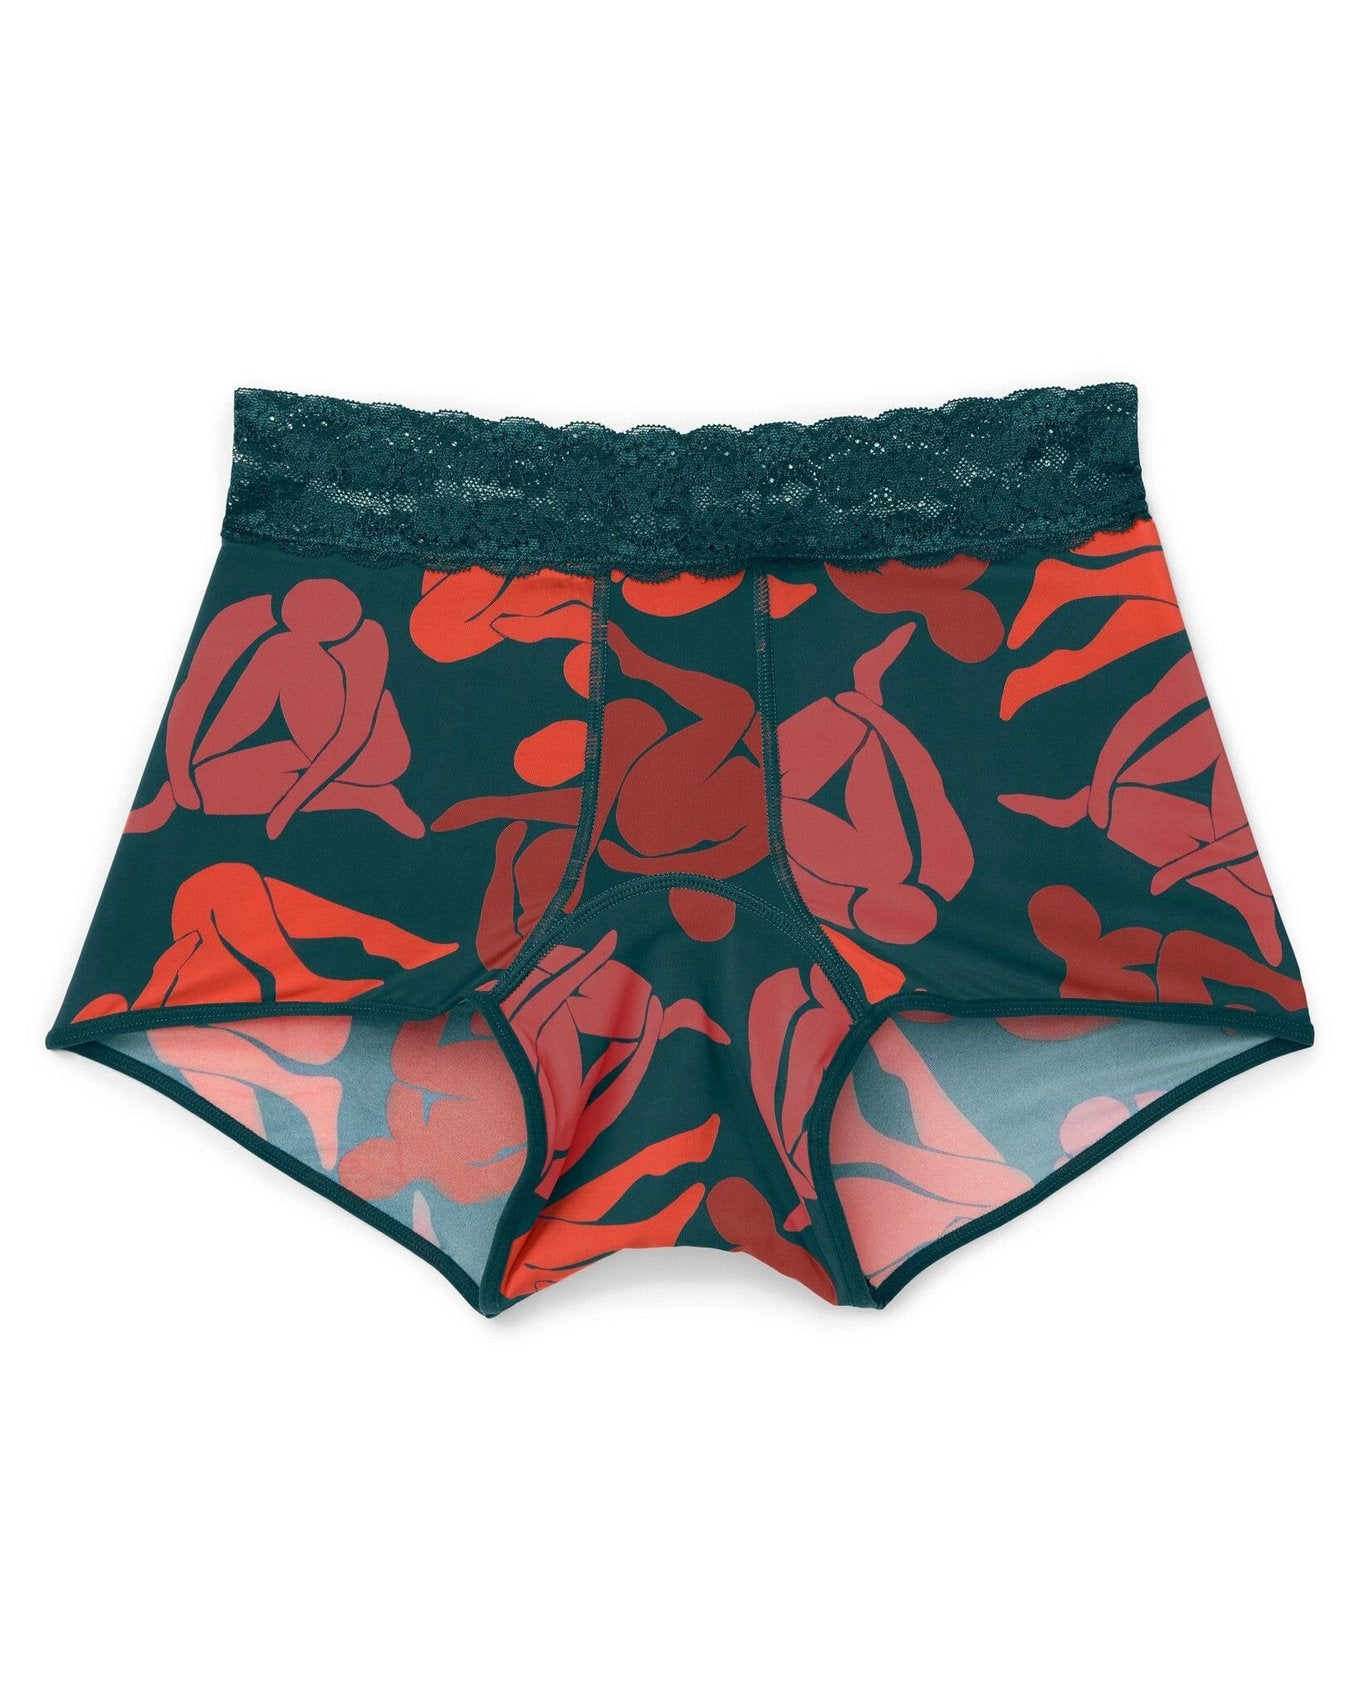 Joyja Emily period-proof panty in color Muse C01 and shape shortie